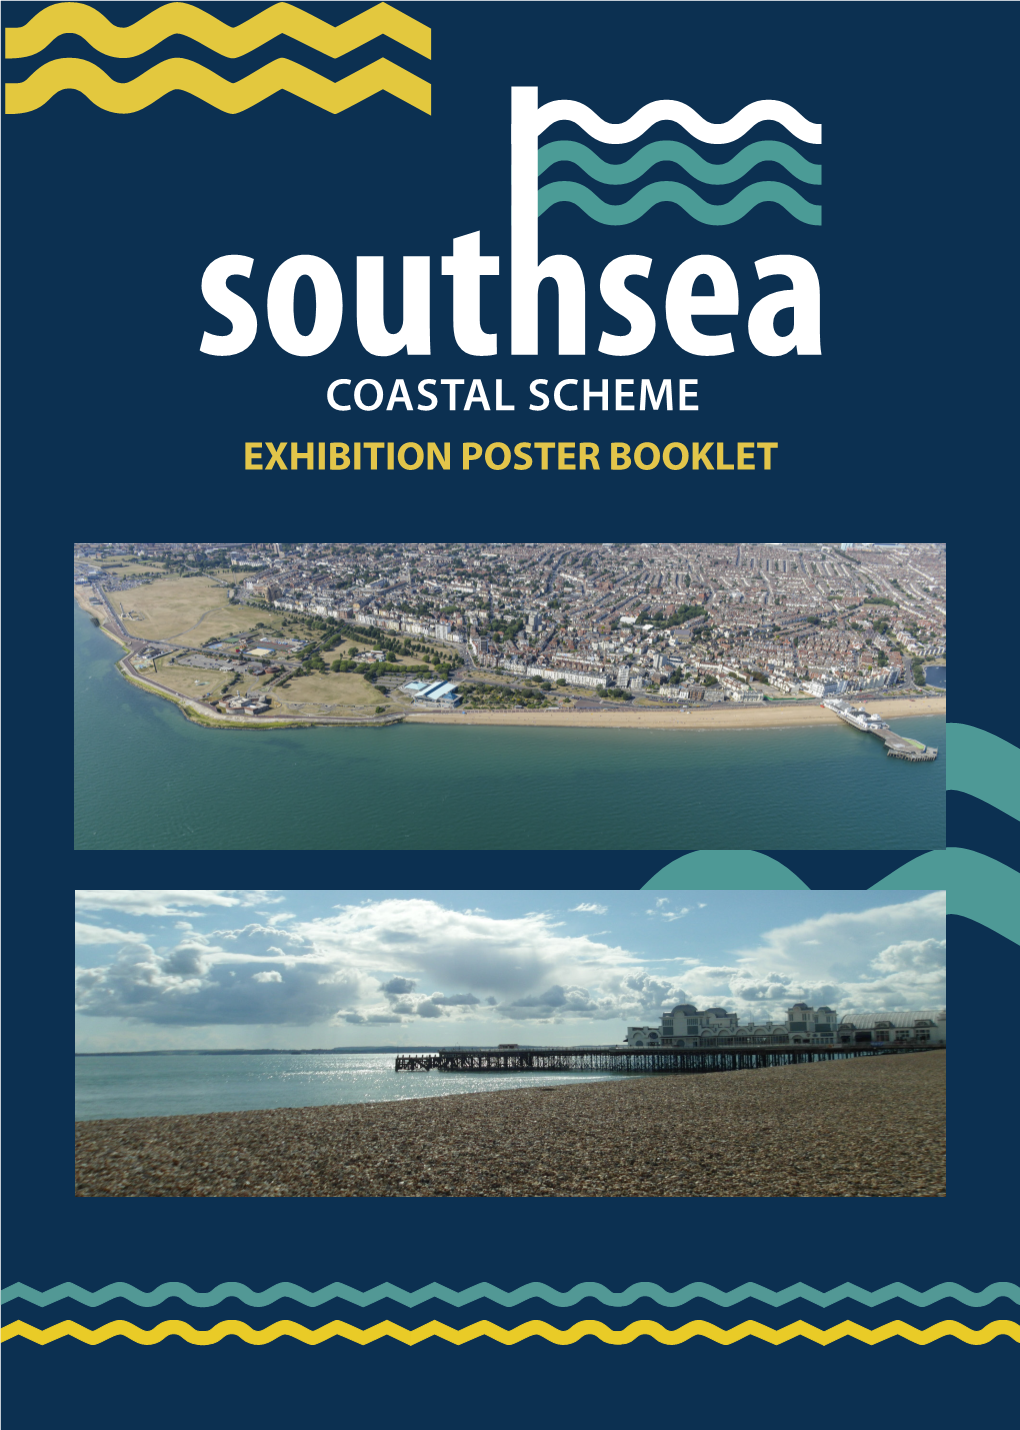 EXHIBITION POSTER BOOKLET INTRODUCTION This Booklet Provides an Overview of the Southsea Coastal Scheme